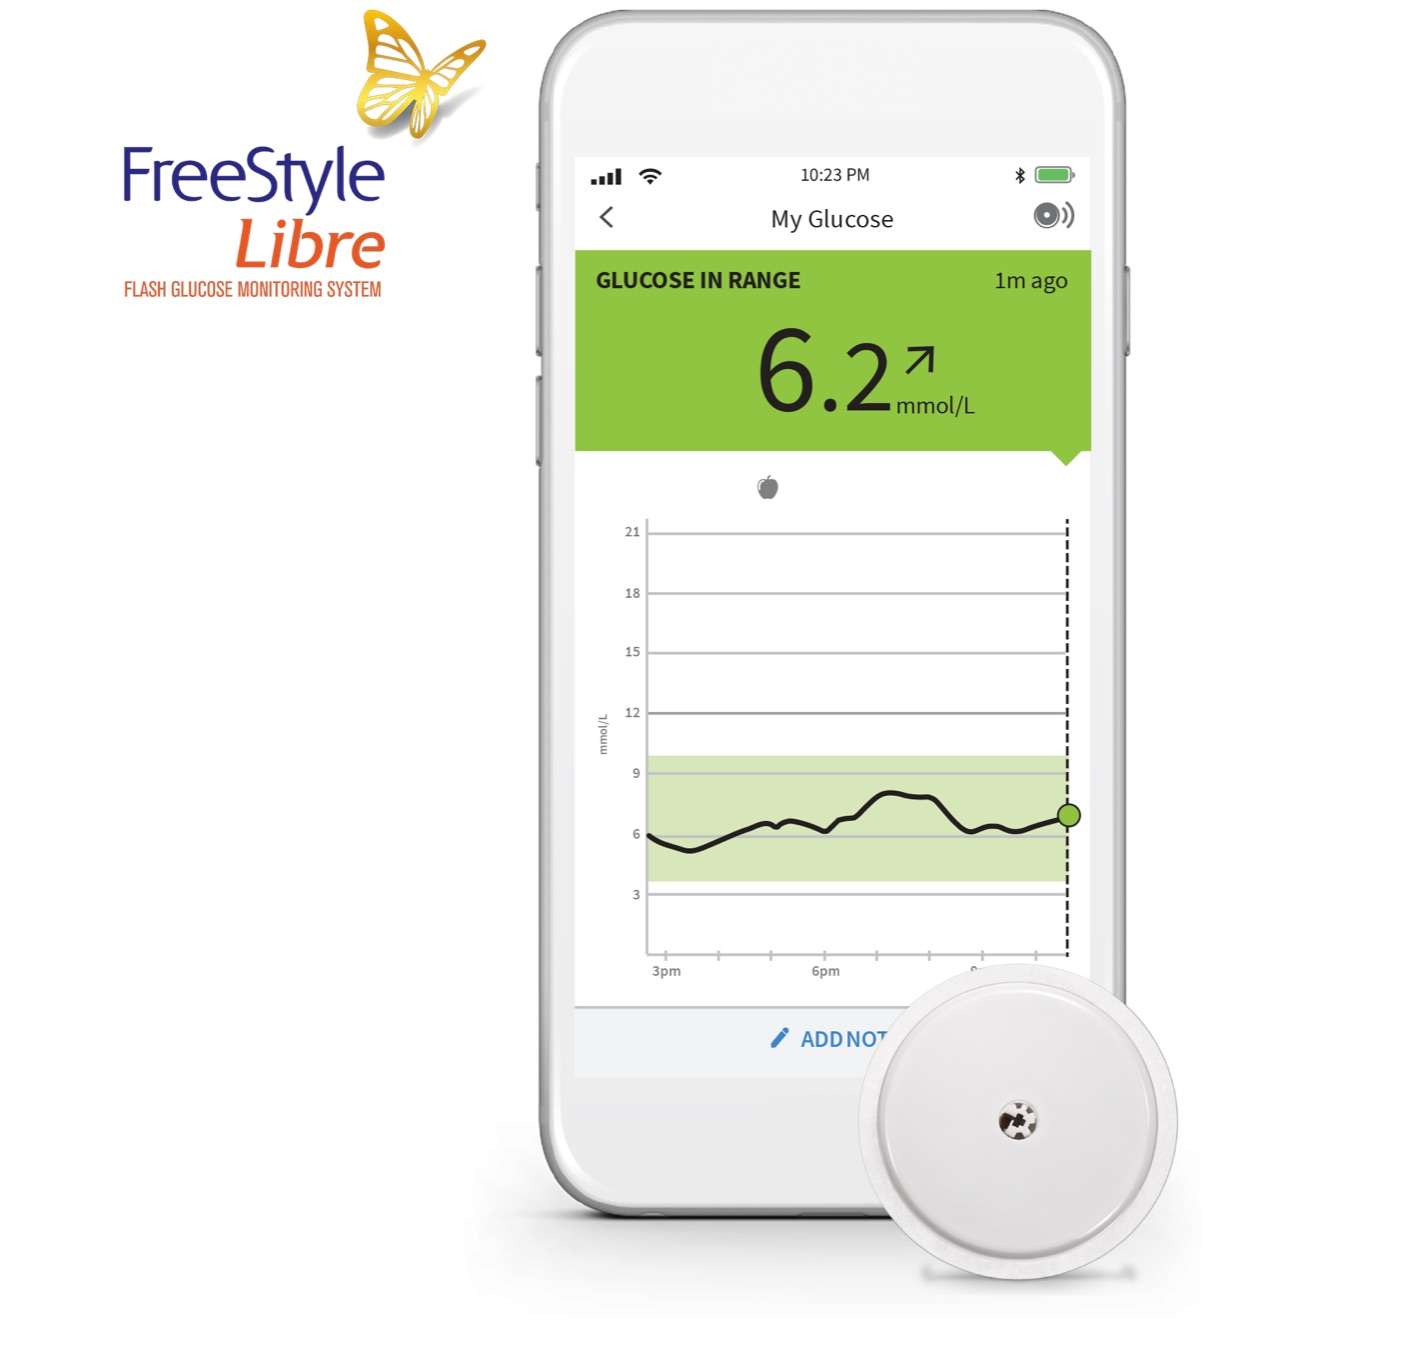 FreeStyle Libre system